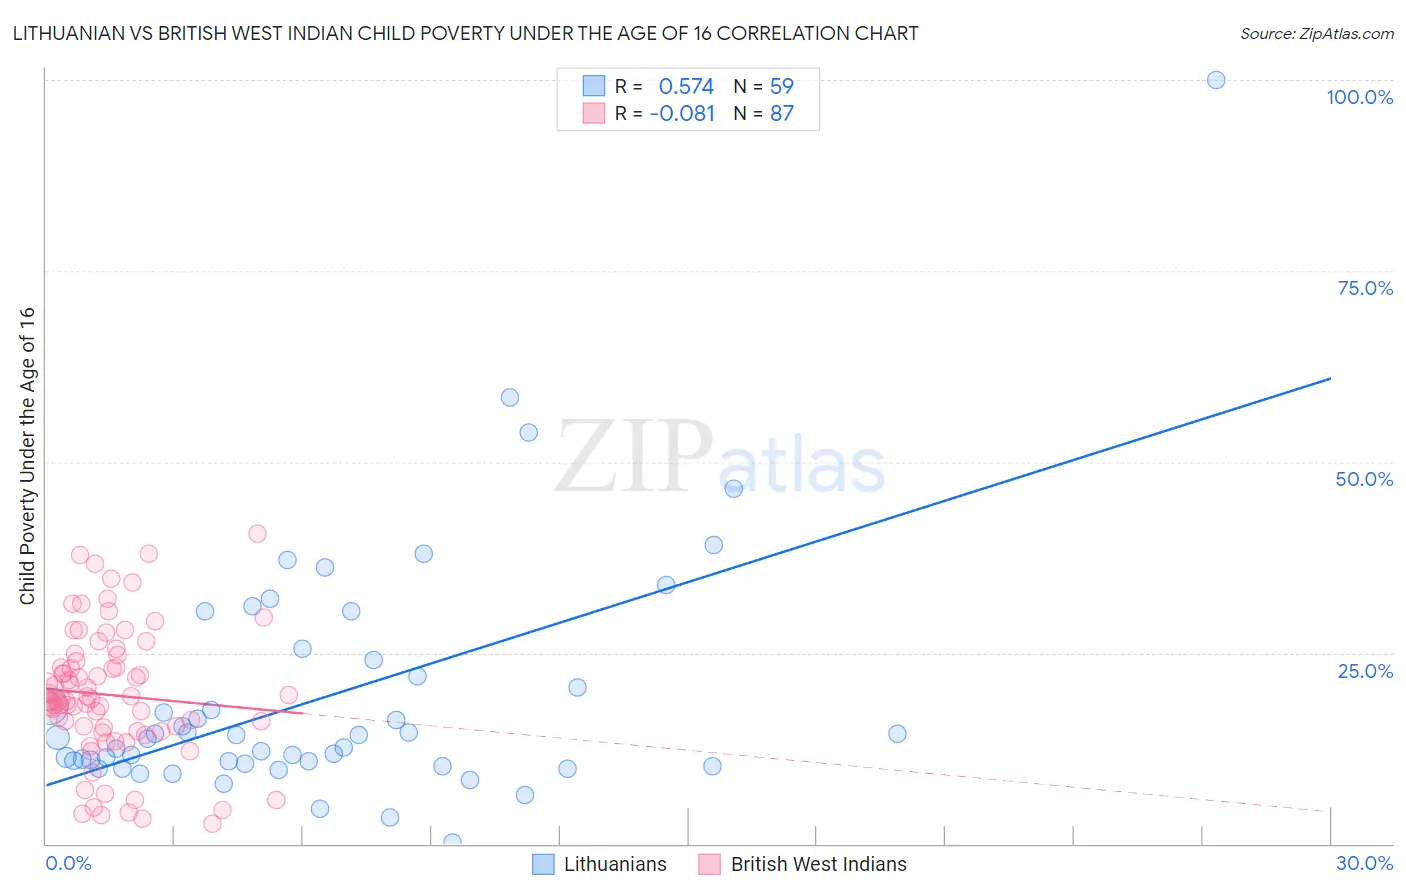 Lithuanian vs British West Indian Child Poverty Under the Age of 16